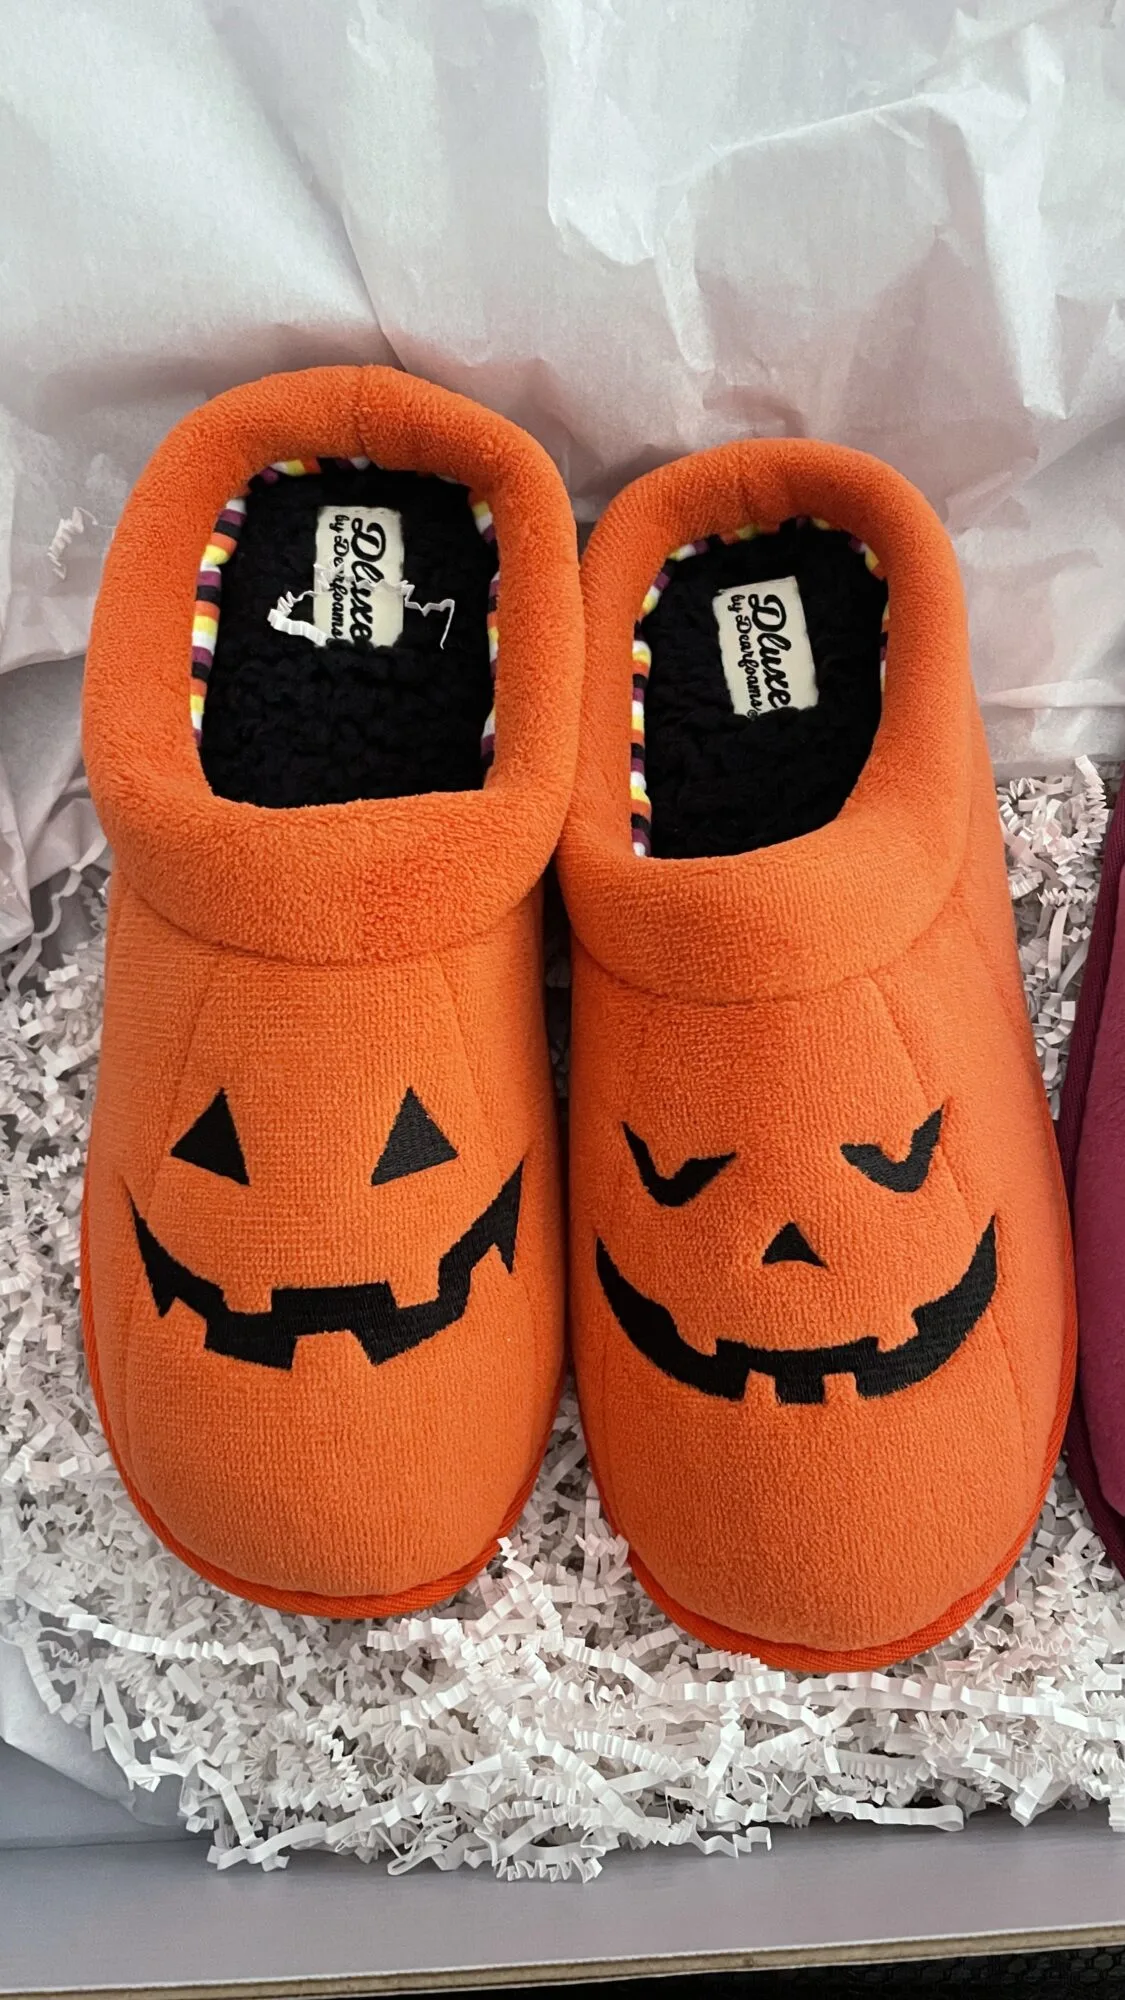 Target is Selling Halloween Slippers and Need Them